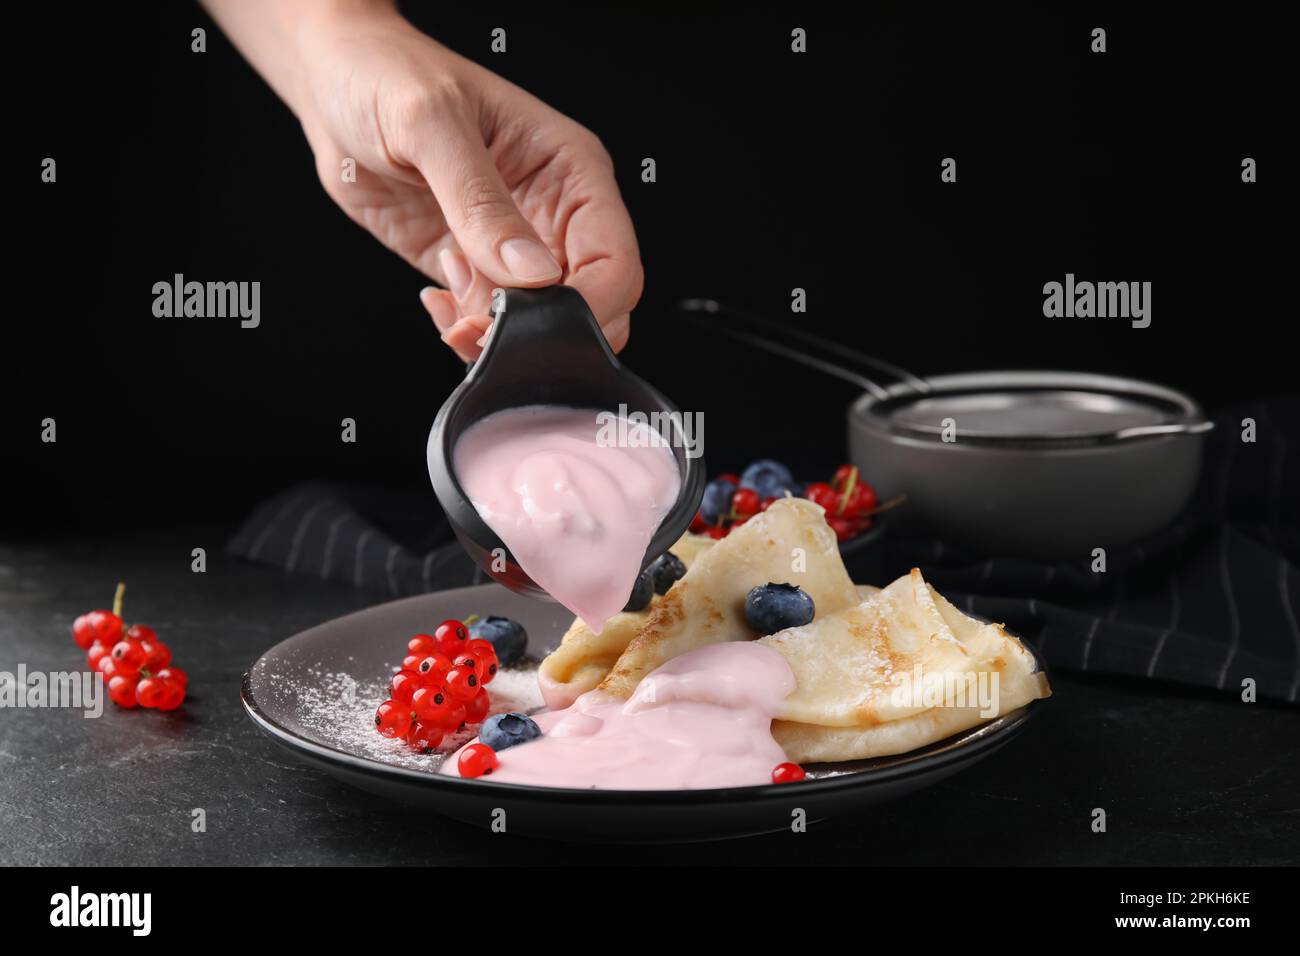 Woman pouring natural yogurt onto crepes with blueberries and red currants at table, closeup Stock Photo